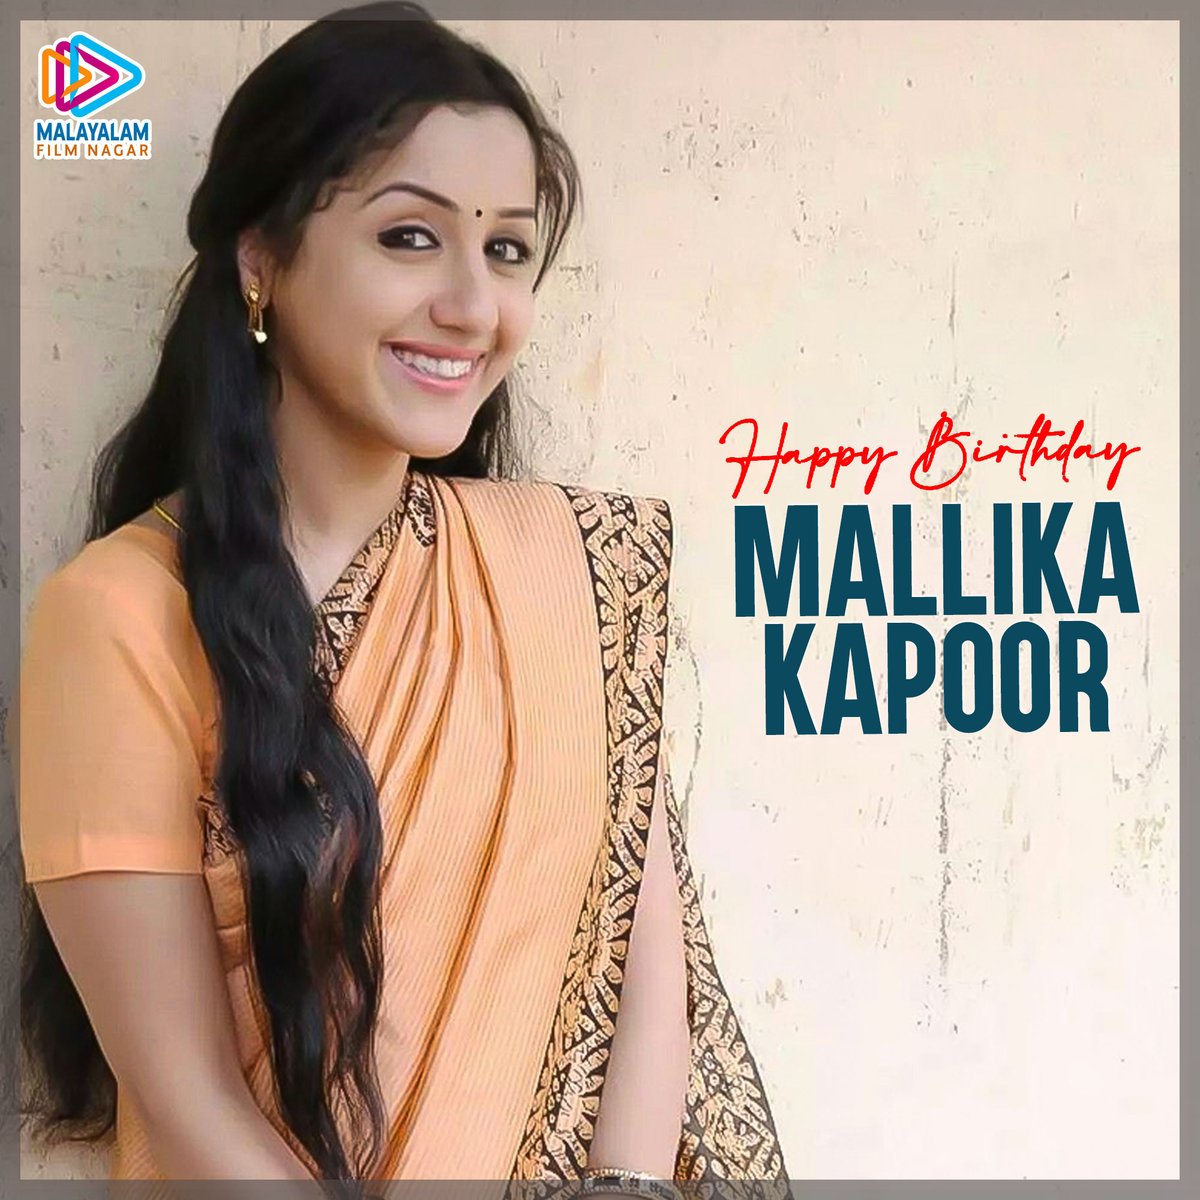 Sending out our birthday wishes to #MallikaKapoor

#HBDMallikaKapoor #HappyBirthdayMallikaKapoor #MalayalamFilmNagar